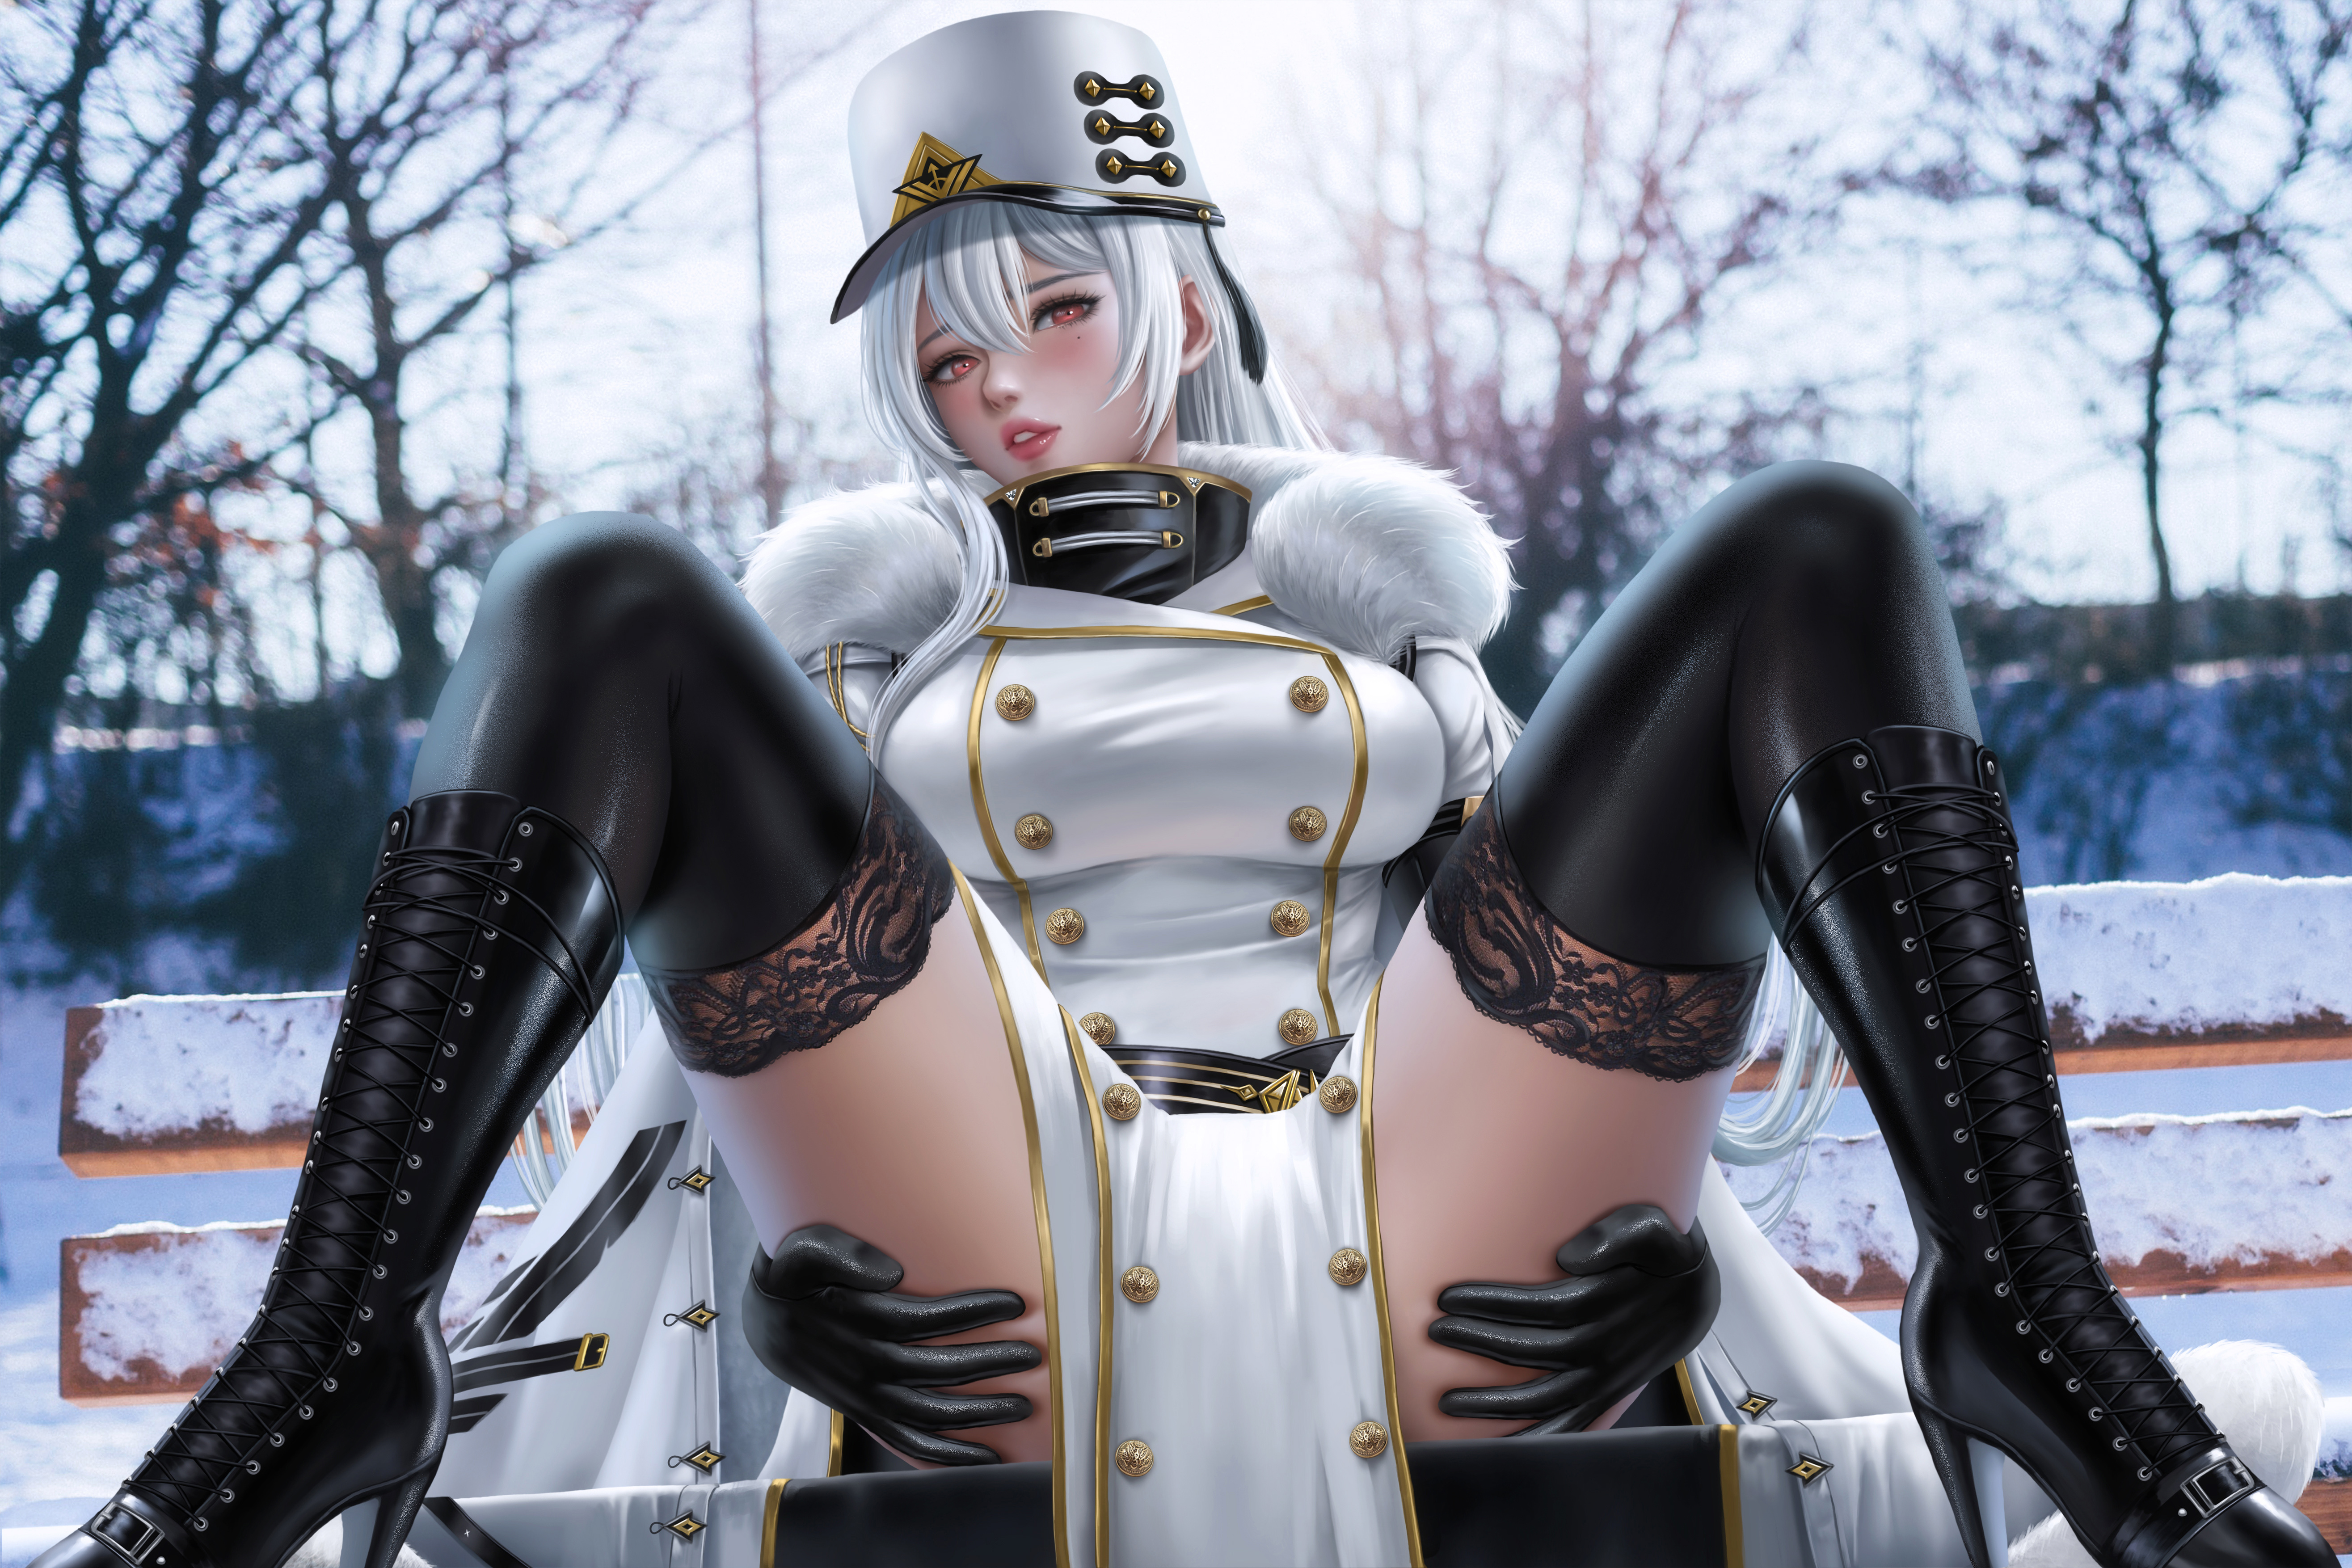 Anime 5262x3508 Sovetskaya Rossiya (Azur Lane) Azur Lane video games video game girls anime anime girls silver hair long hair bangs women with hats military uniform coats fur coats dress looking at viewer red eyes blushing parted lips spread legs sitting thick thigh lingerie stockings black stockings boots high heeled boots bench snow winter depth of field artwork drawing digital art illustration fan art Alexander Dinh gloves bright